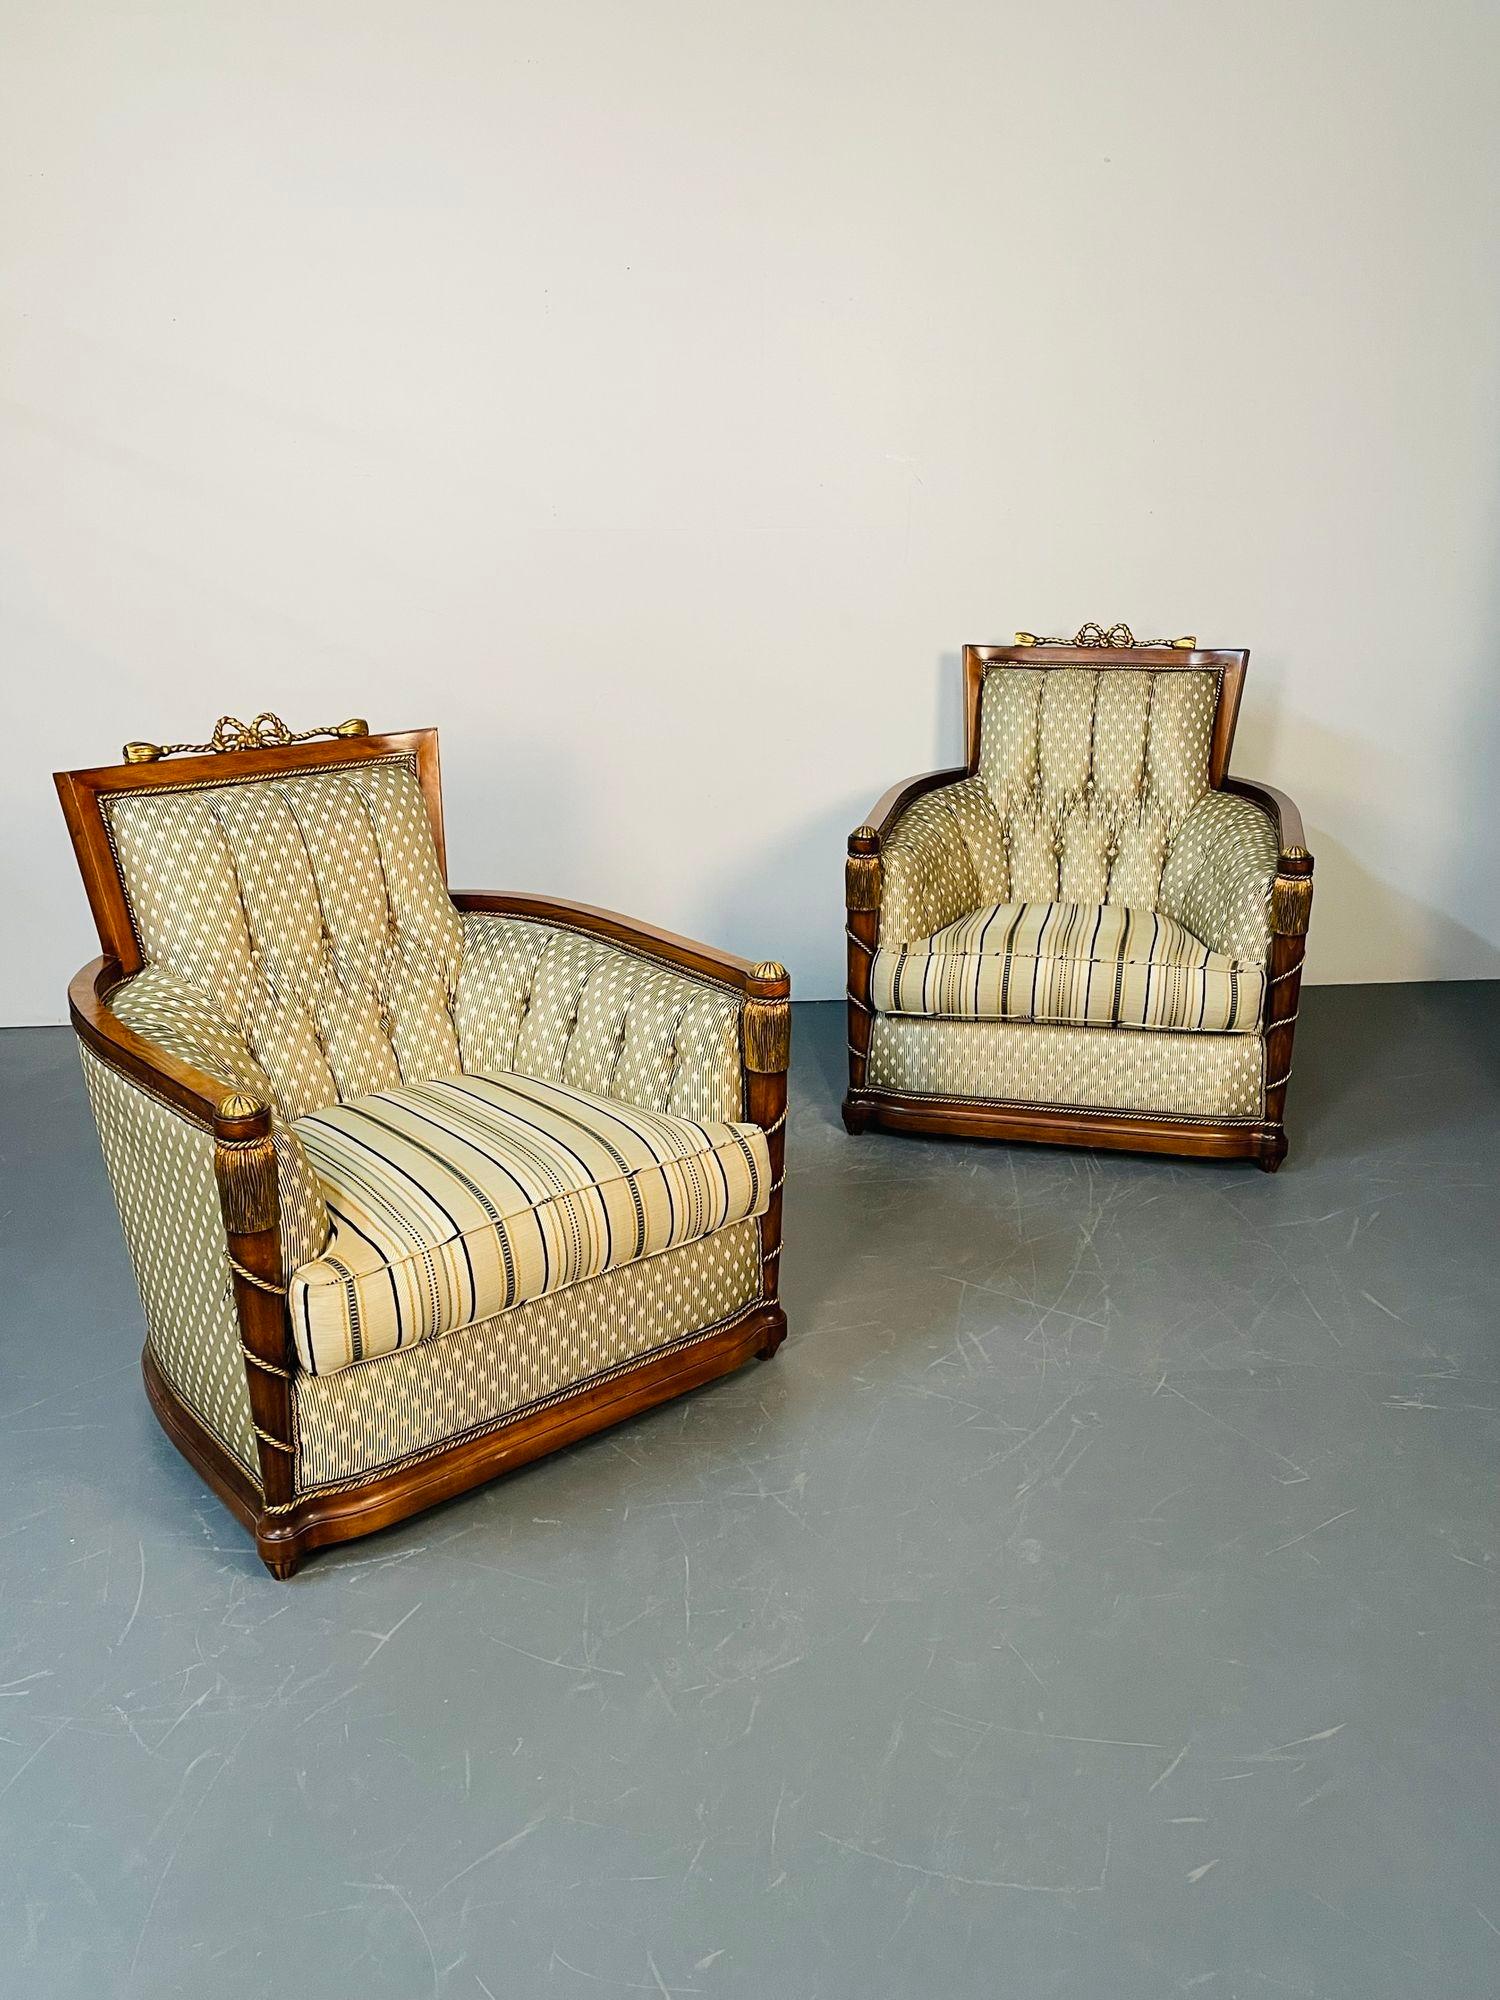 Pair of Grosfeld House Hi Back Arm Chairs, Bergere or Lounge Chairs, Scalamandre Fabric
 
Part of a complete Living Room set sold as one pair of chairs and a sofa separately. This stunning Grosfeld House pair of tall back arm chairs in a stunning